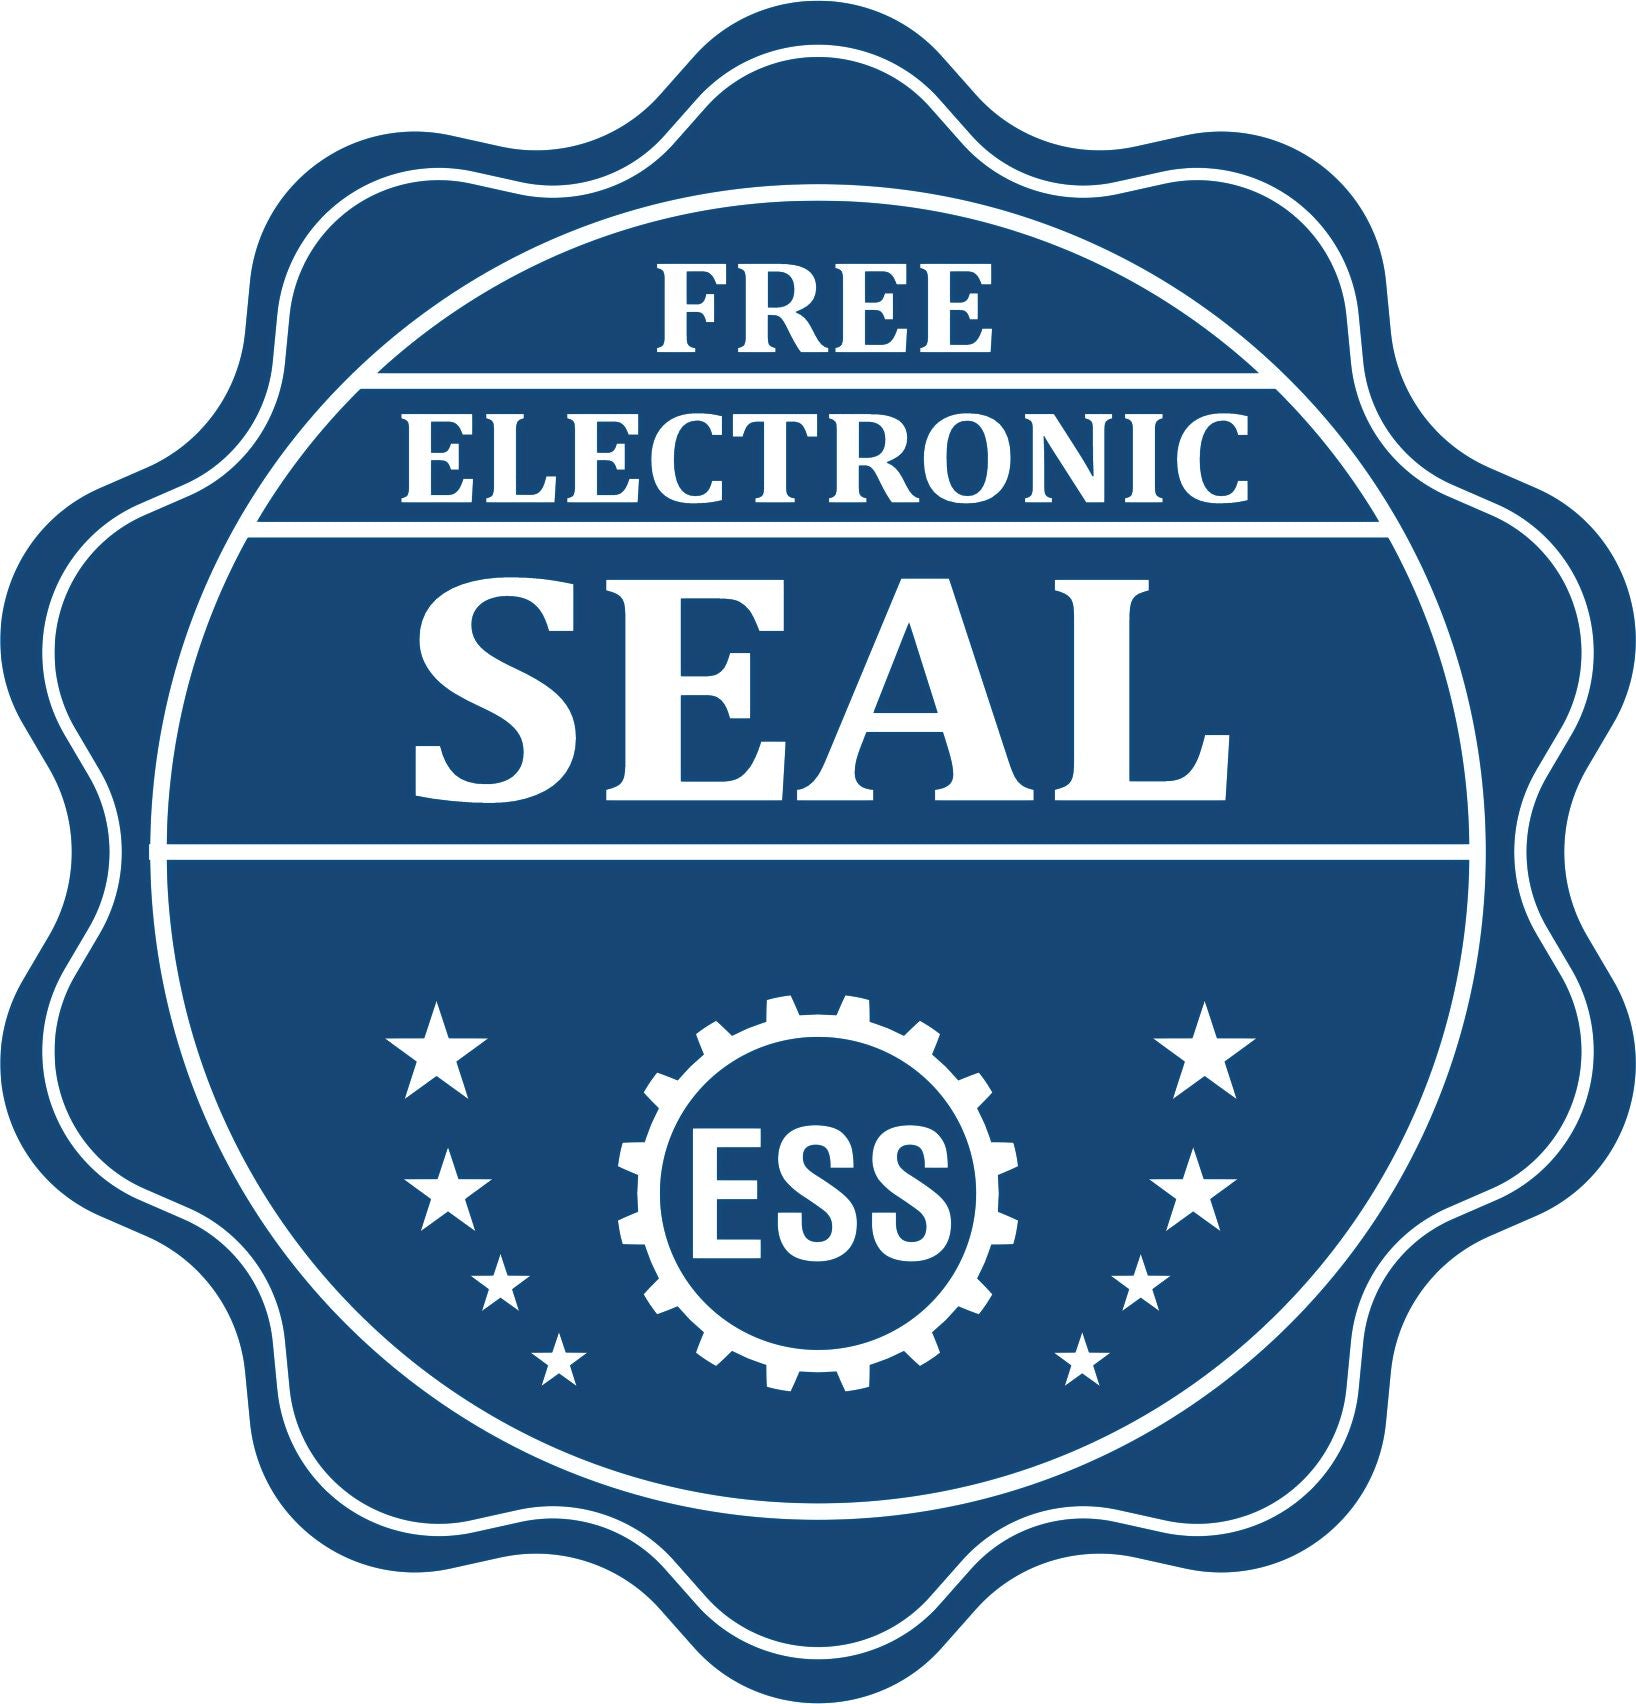 A badge showing a free electronic seal for the Slim Pre-Inked Virginia Architect Seal Stamp with stars and the ESS gear on the emblem.